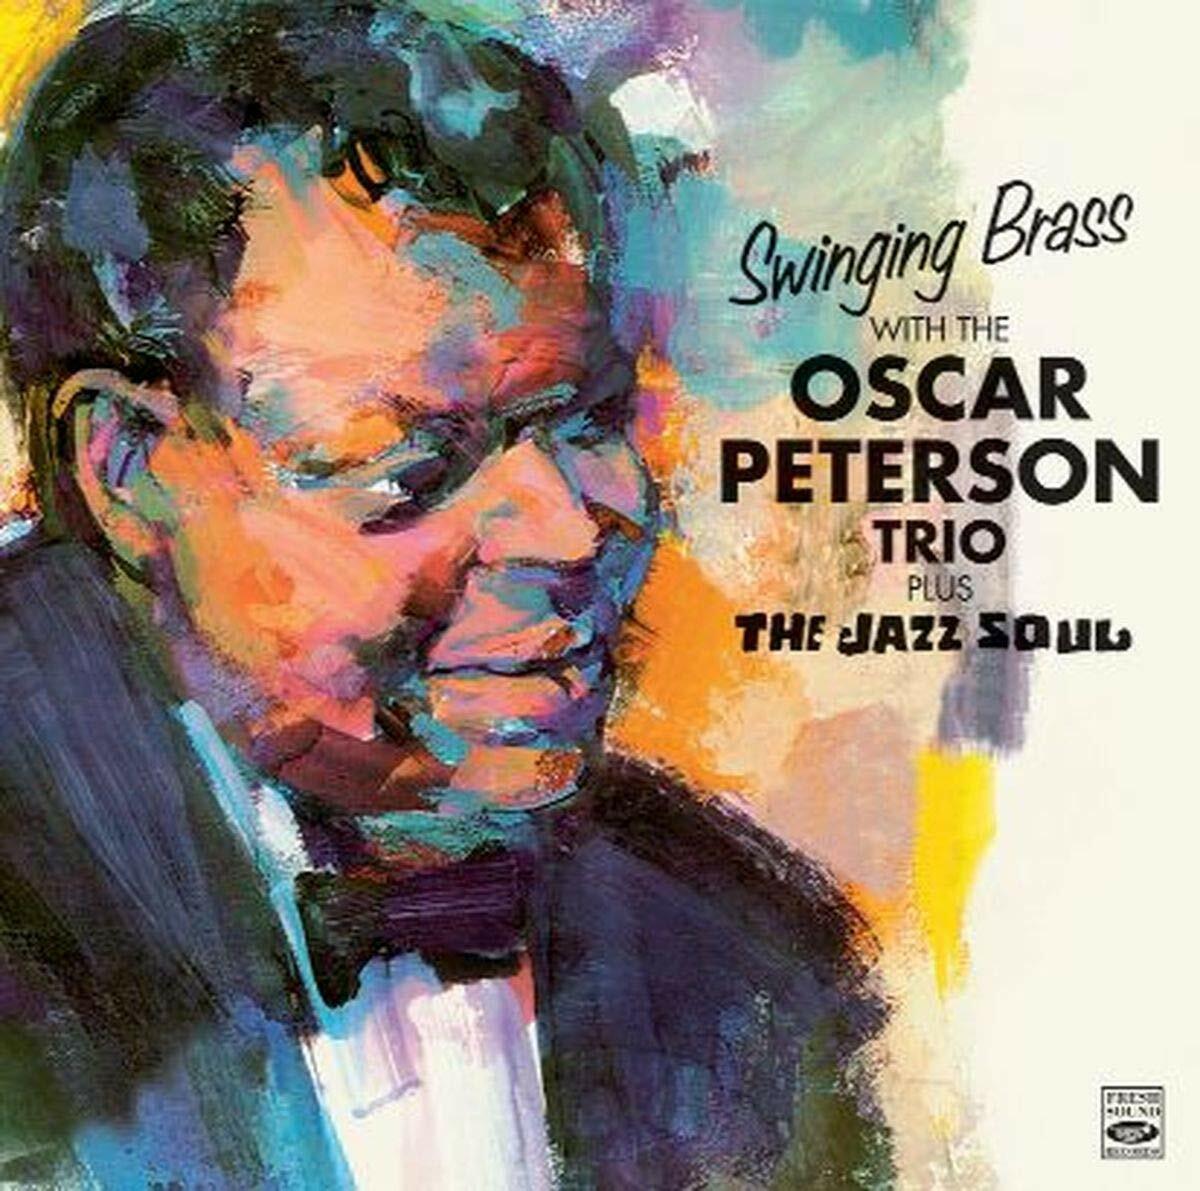 Swinging Brass With The Oscar Peterson Trio + The Jazz Soul (2 LP On 1 CD)